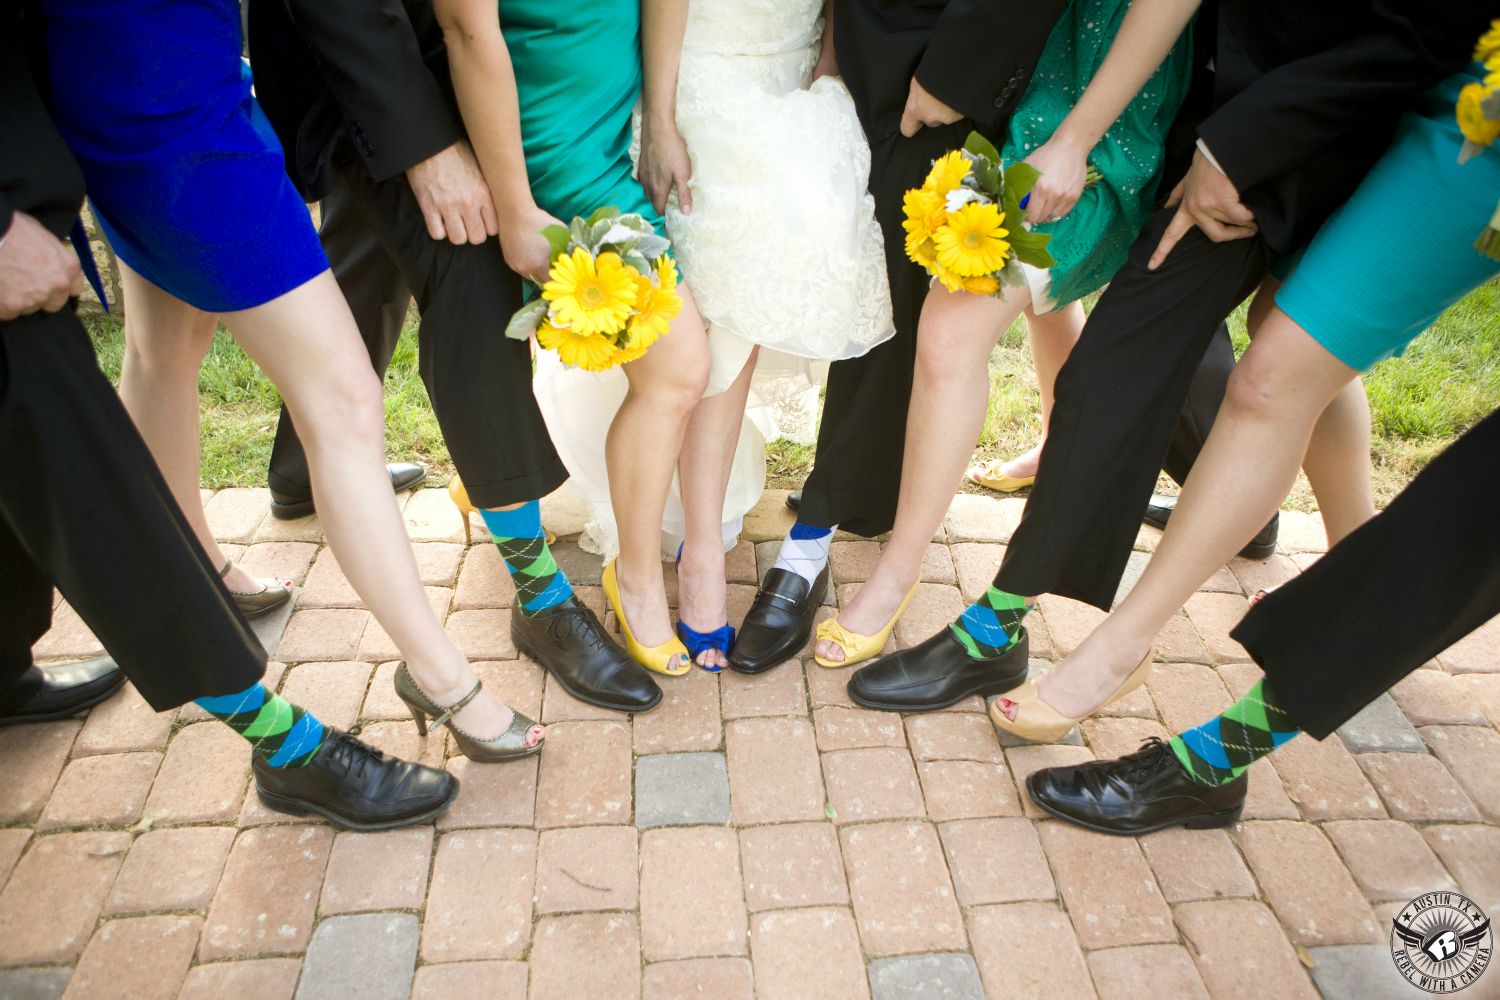 Fun and whimsical image of the brightly colored shoes and socks of the wedding party that are green and blue with yellow bouquets by Bouquets of Austin at Nature's Point Austin wedding venue.